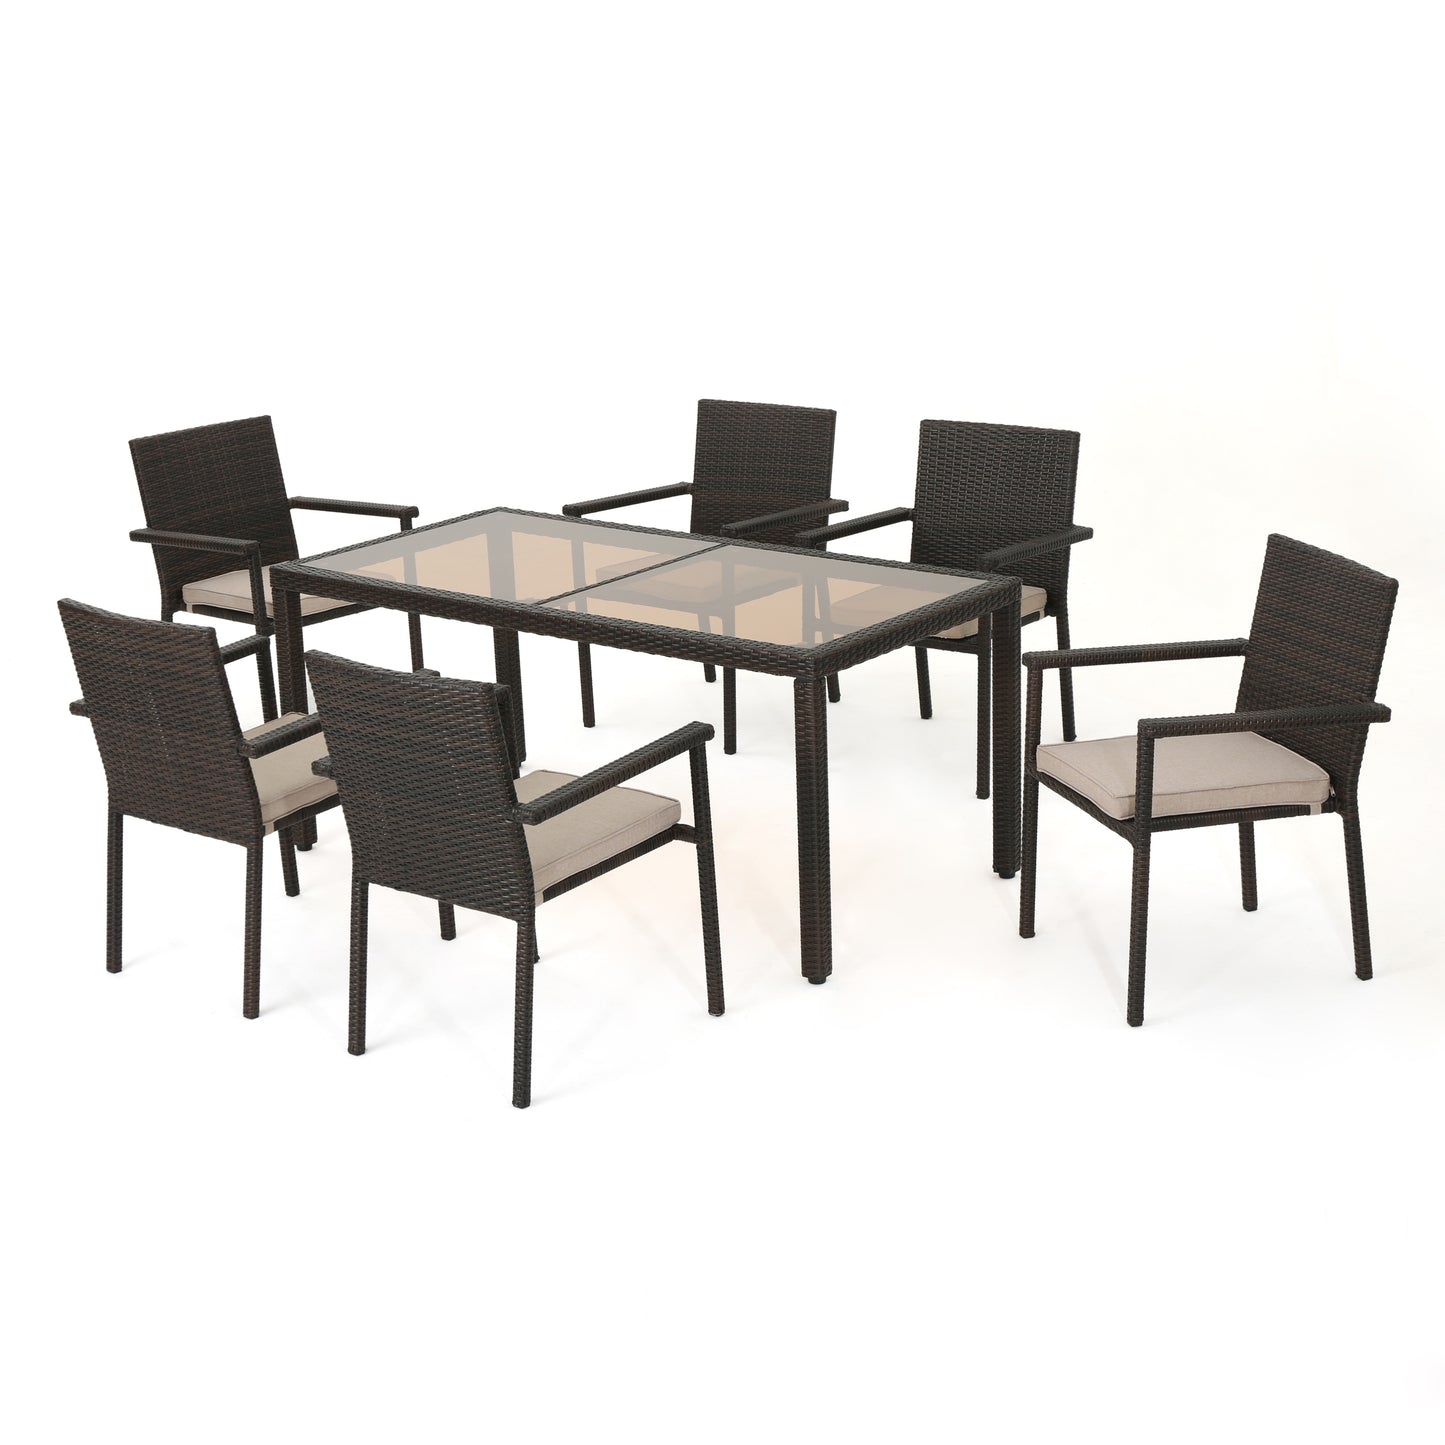 San Simeon Outdoor 7 Piece Wicker Dining Set with Water Resistant Cushions